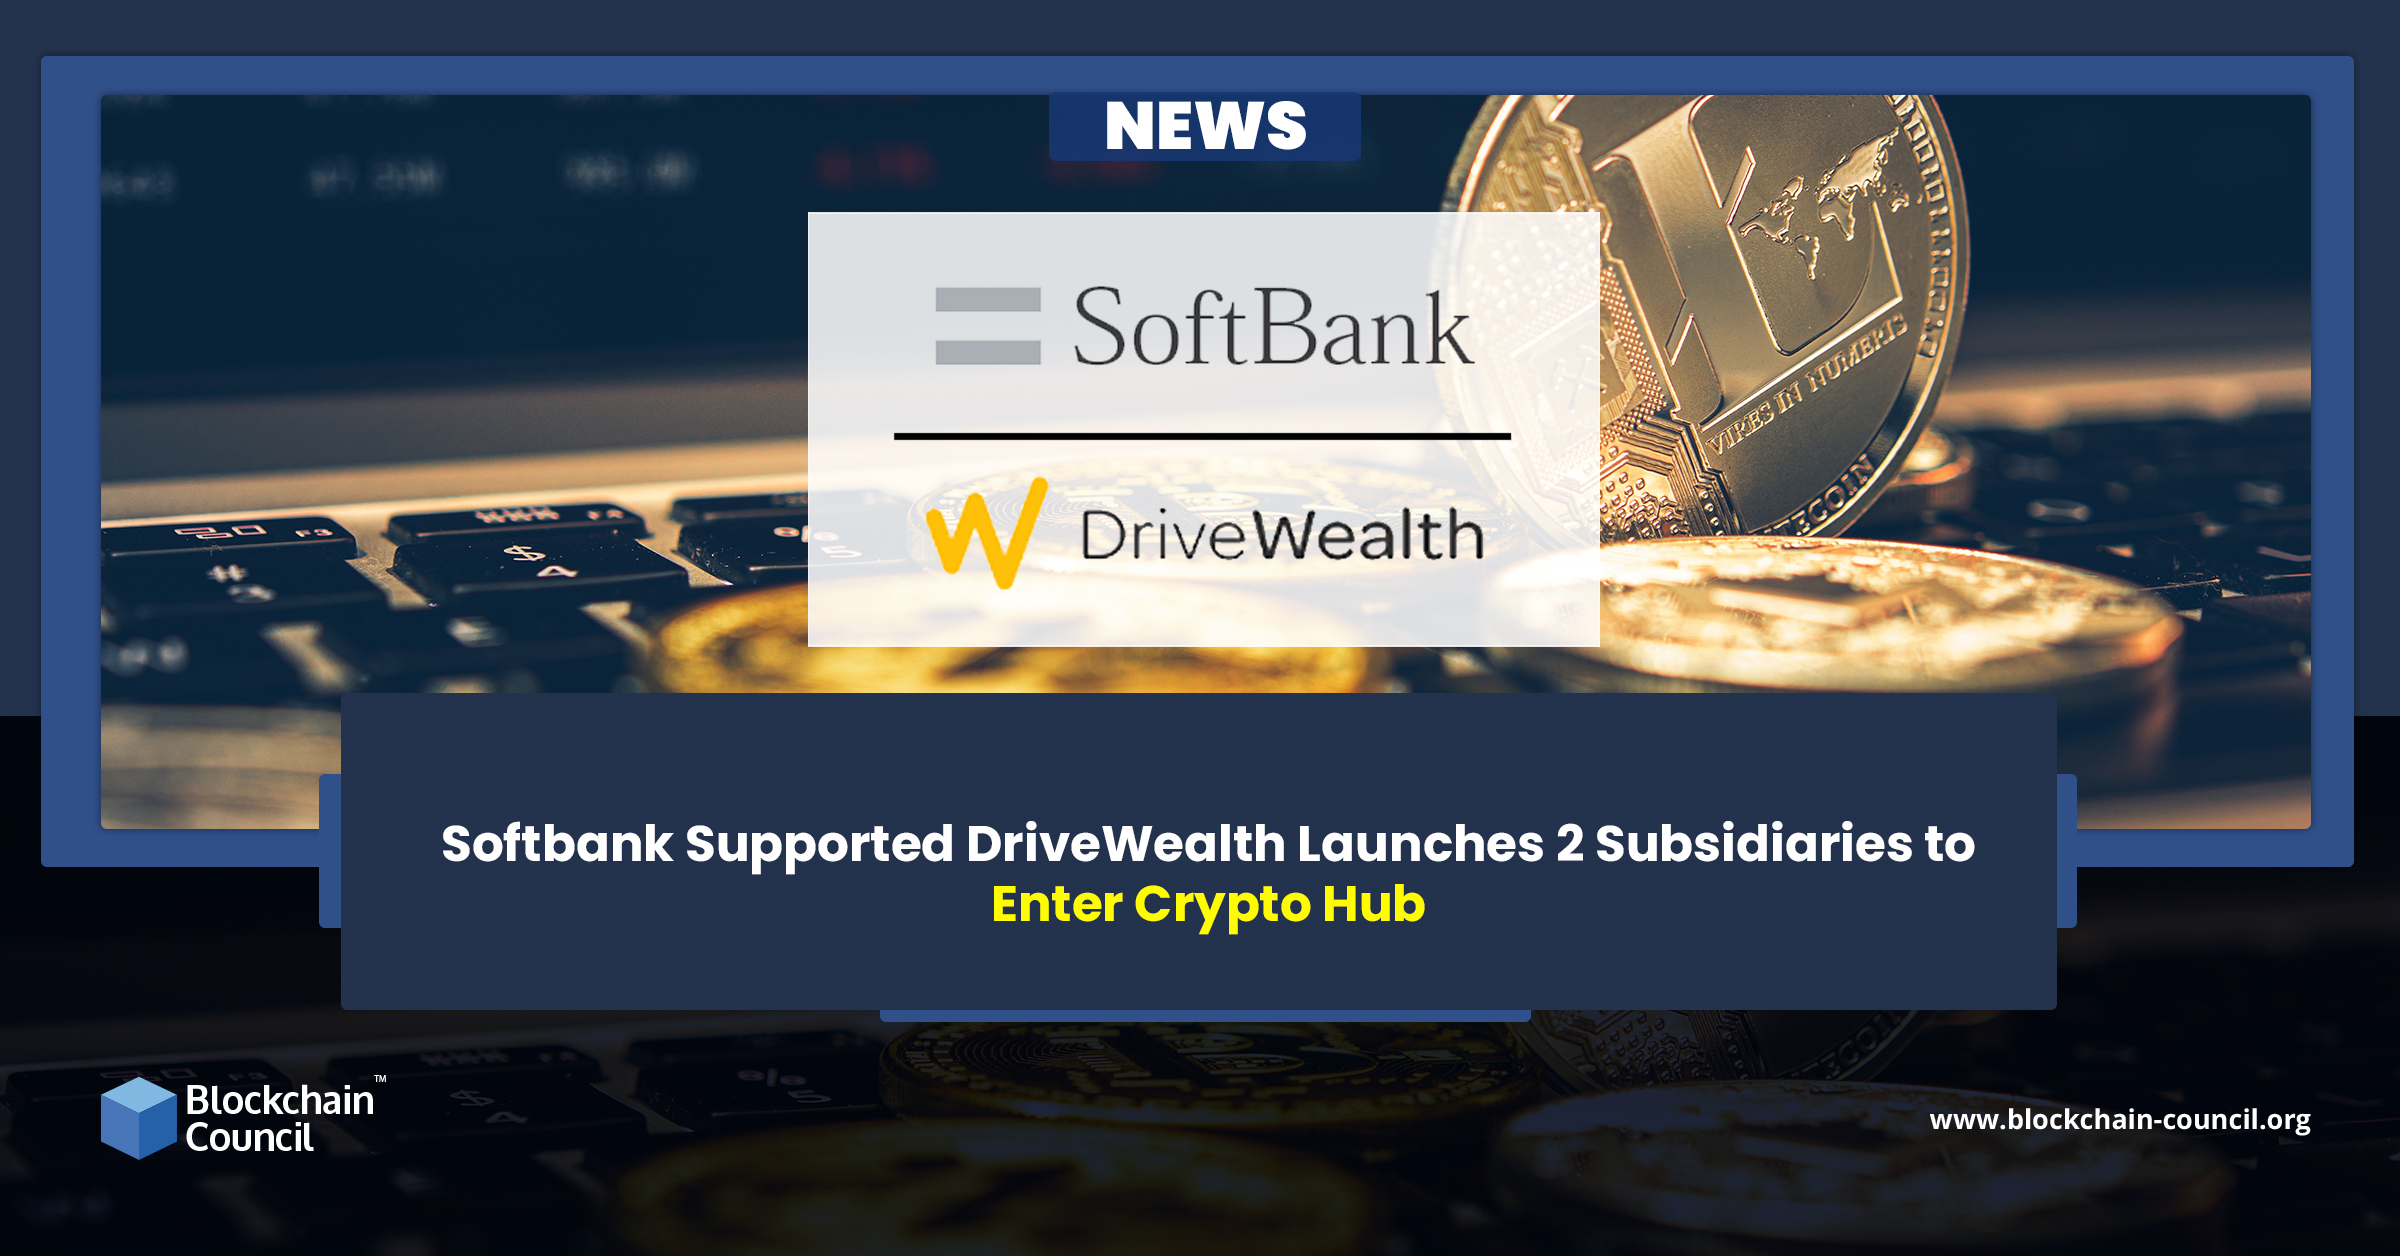 SOFTBANK SUPPORTED DRIVEWEALTH LAUNCHES 2 SUBSIDIARIES TO ENTER CRYPTO HUB